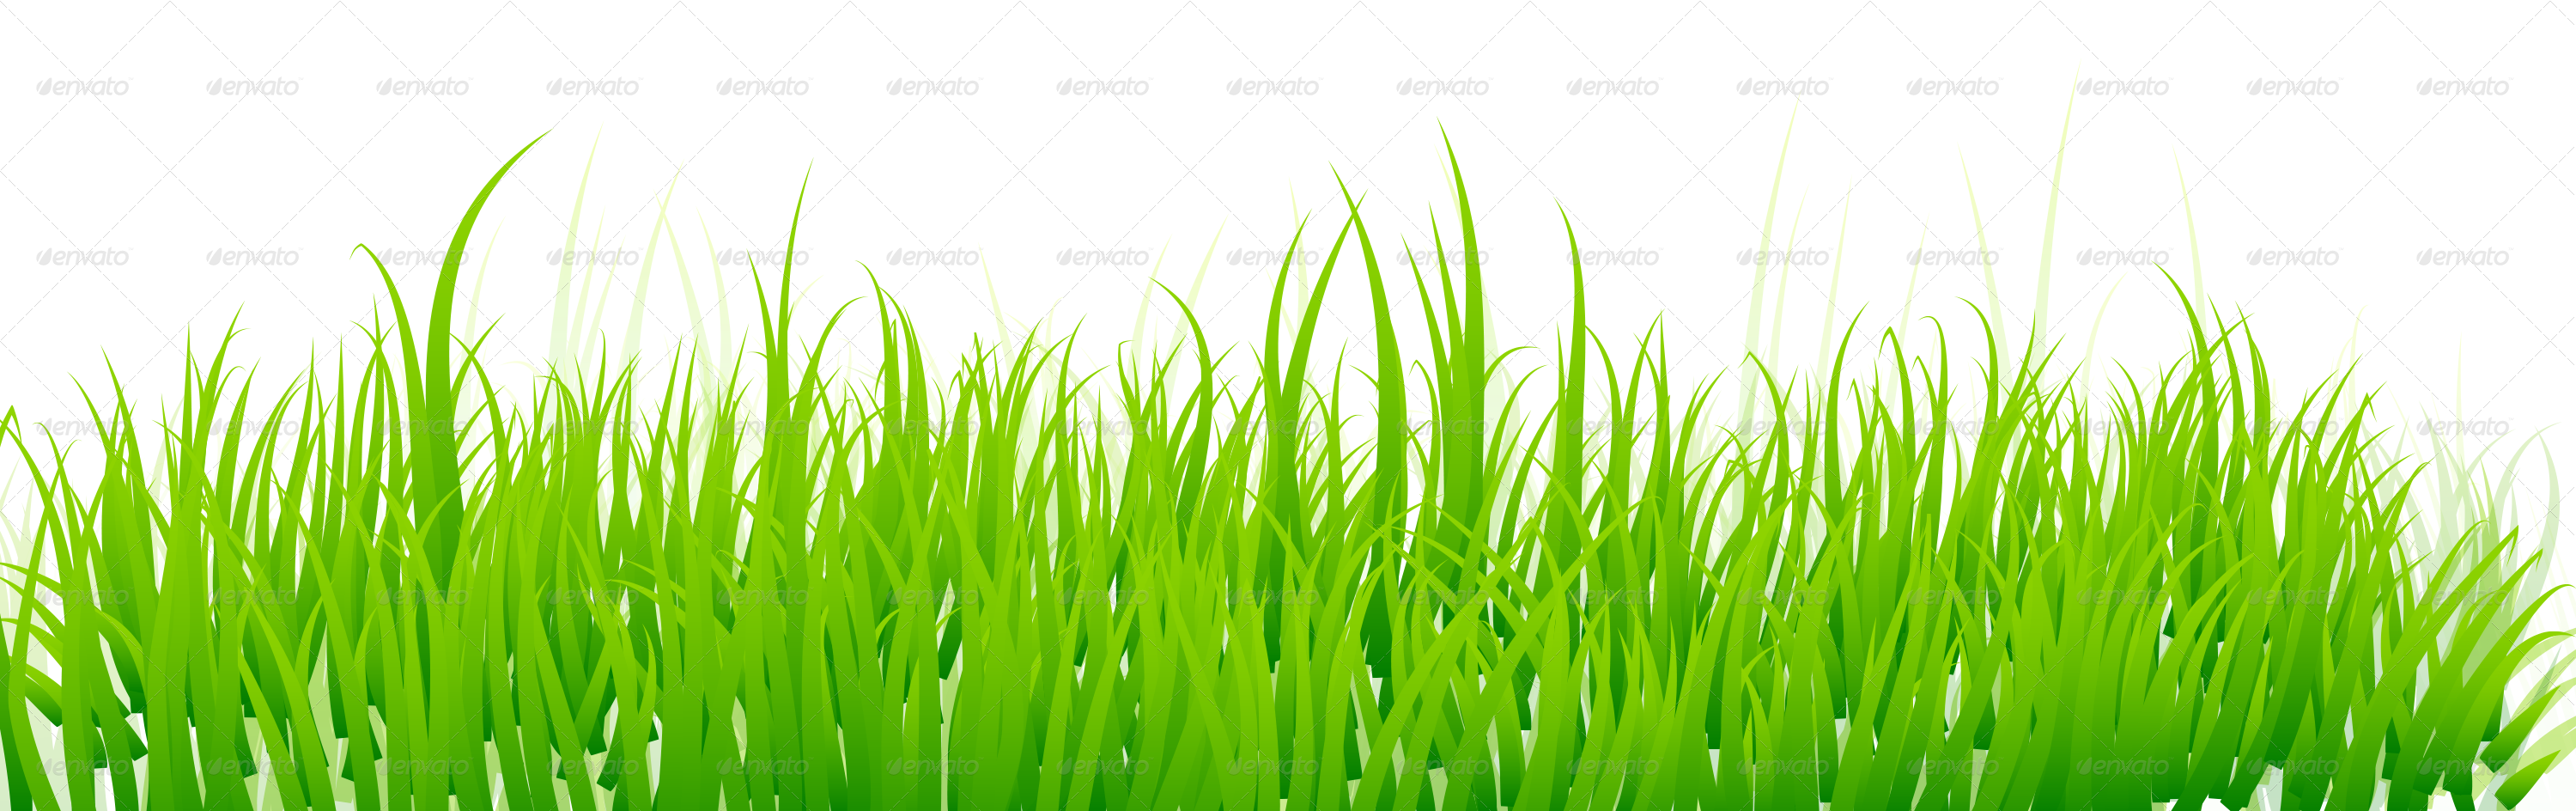 Png Grass Images For Photosho